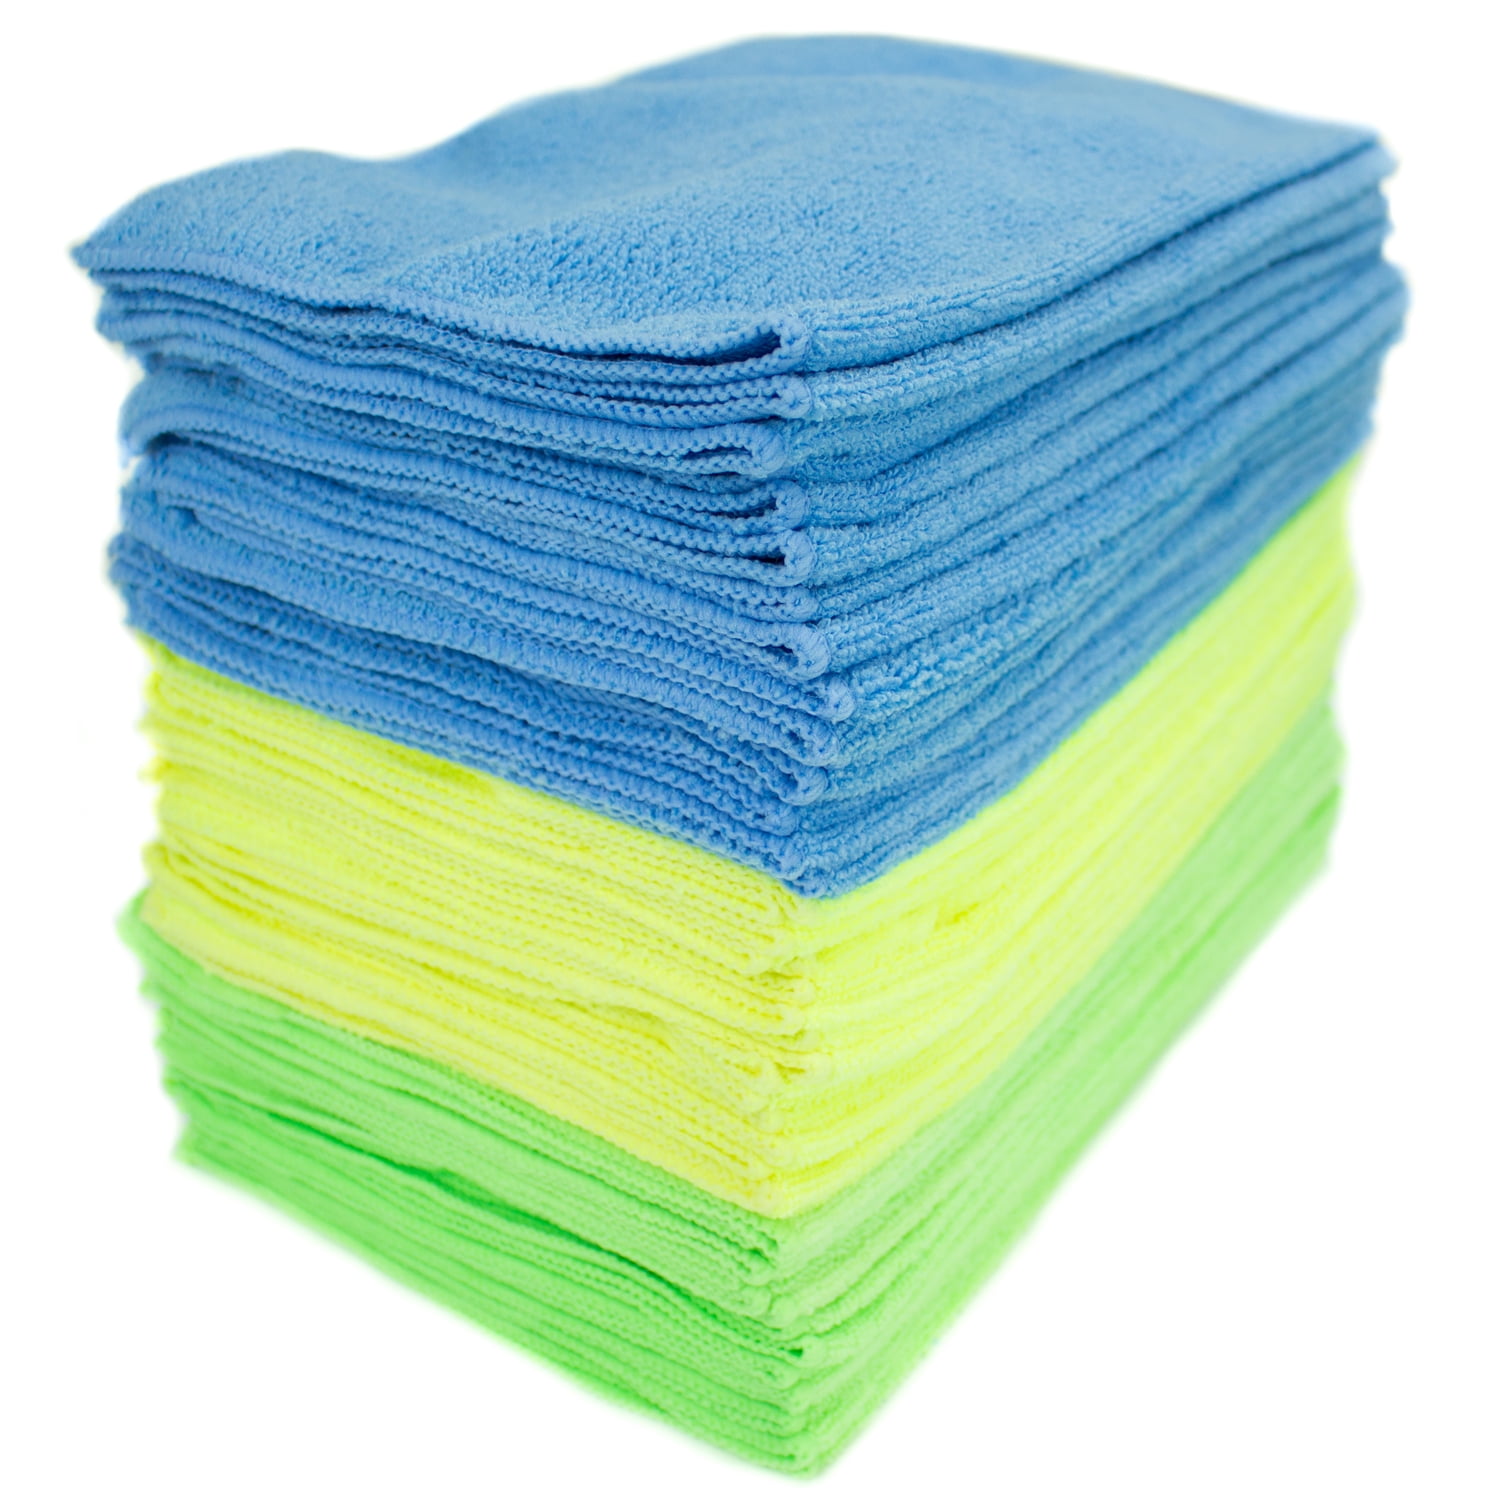 Zwipes Microfiber Cleaning Cloths 36-Pack Anti-Scratch Rag Towel Car Detailing 